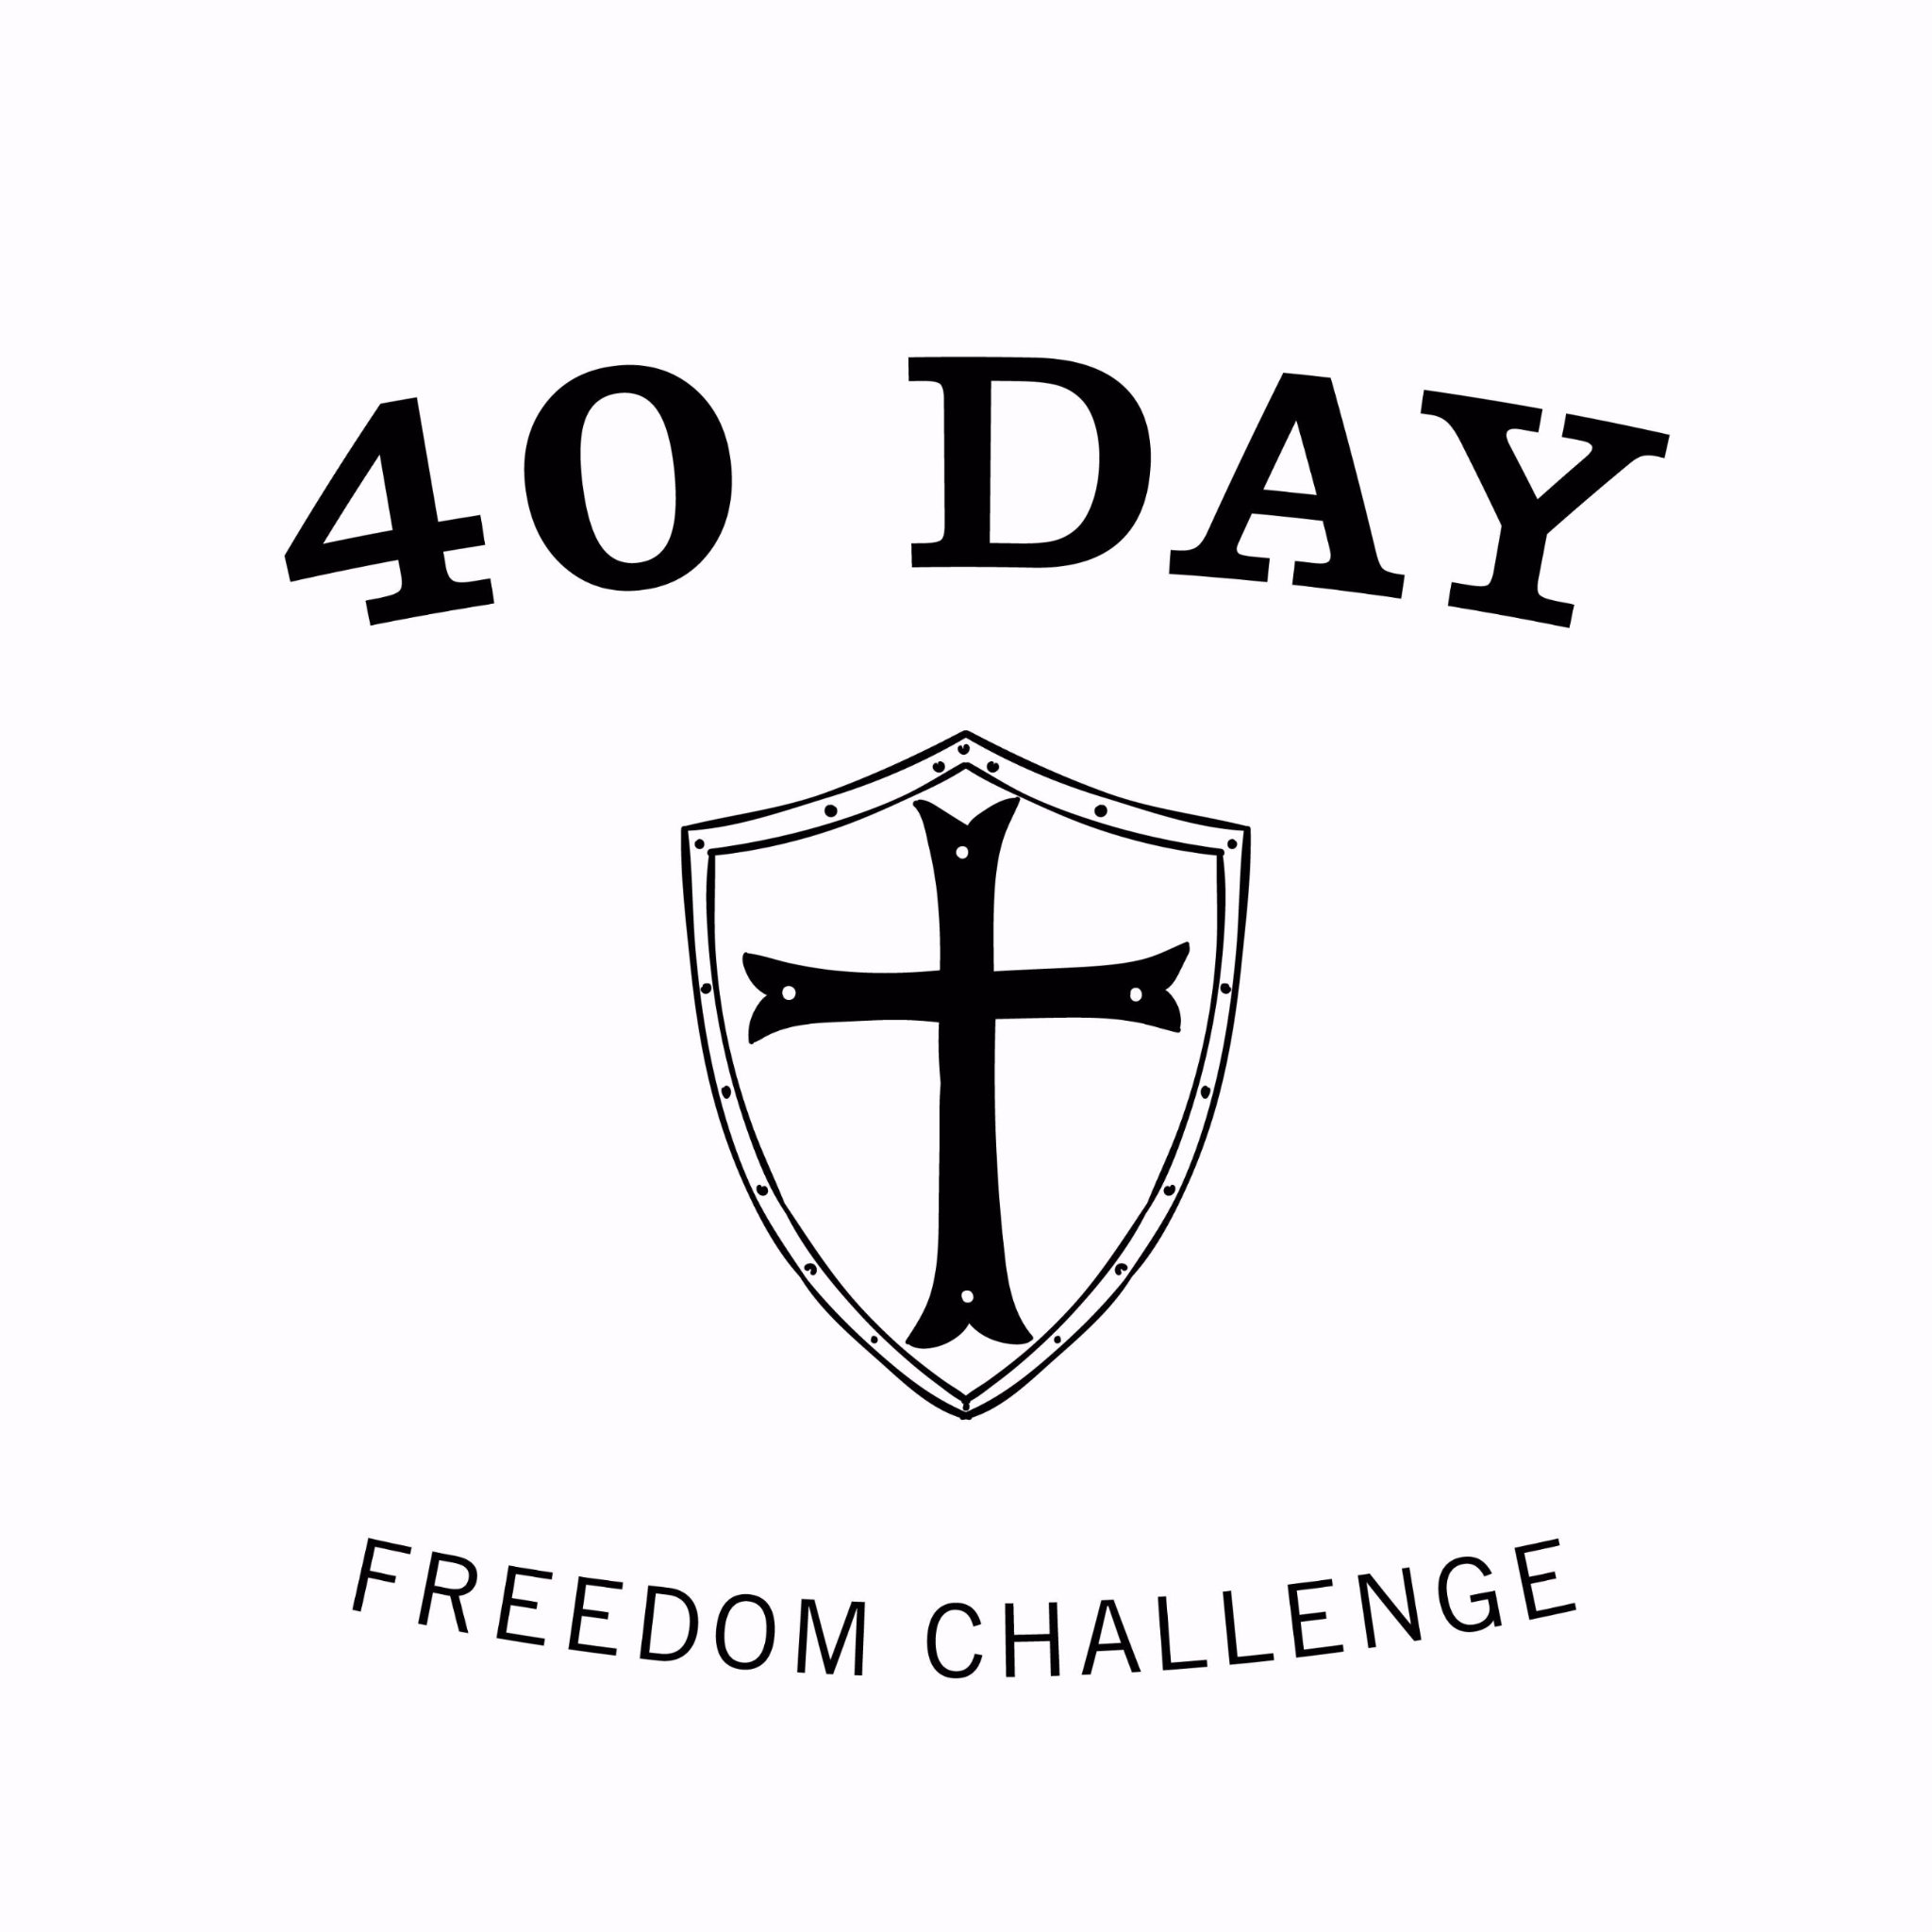 Transform Your Life in 40 Days based on Biblical Principles! Greater Health, Purpose-Driven Wealth, Improve Relationships & Spiritual Growth! 🙏🏼Sign Up Now ⤵️